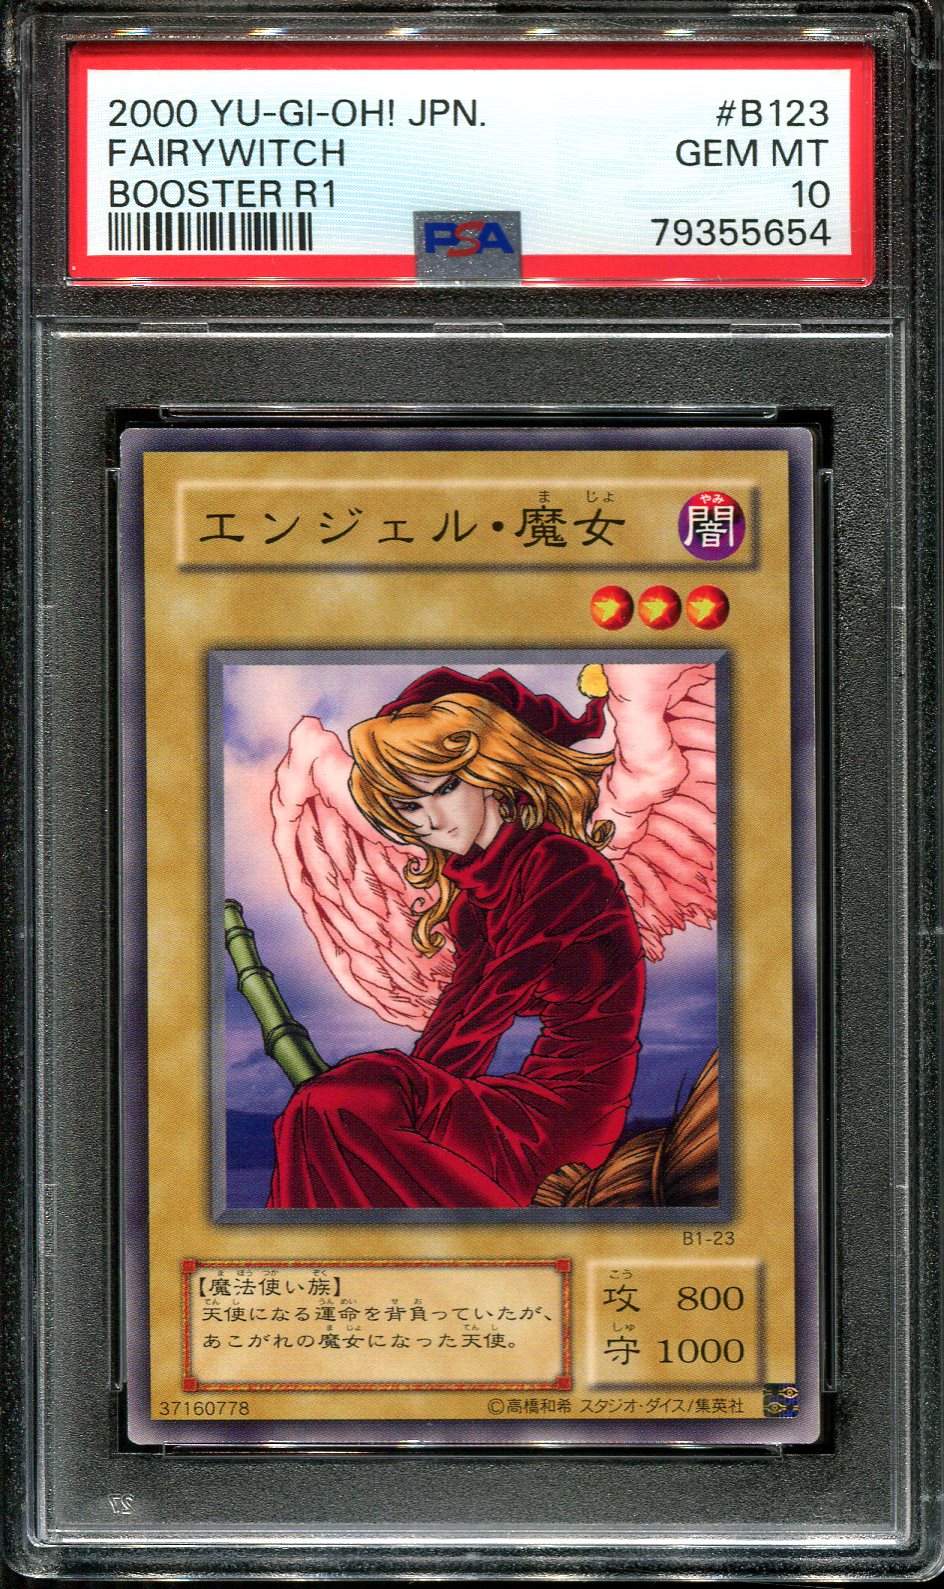 YUGIOH - PSA 10 - FAIRY WITCH - B1-23 - BOOSTER R1 - JAPANESE OCG